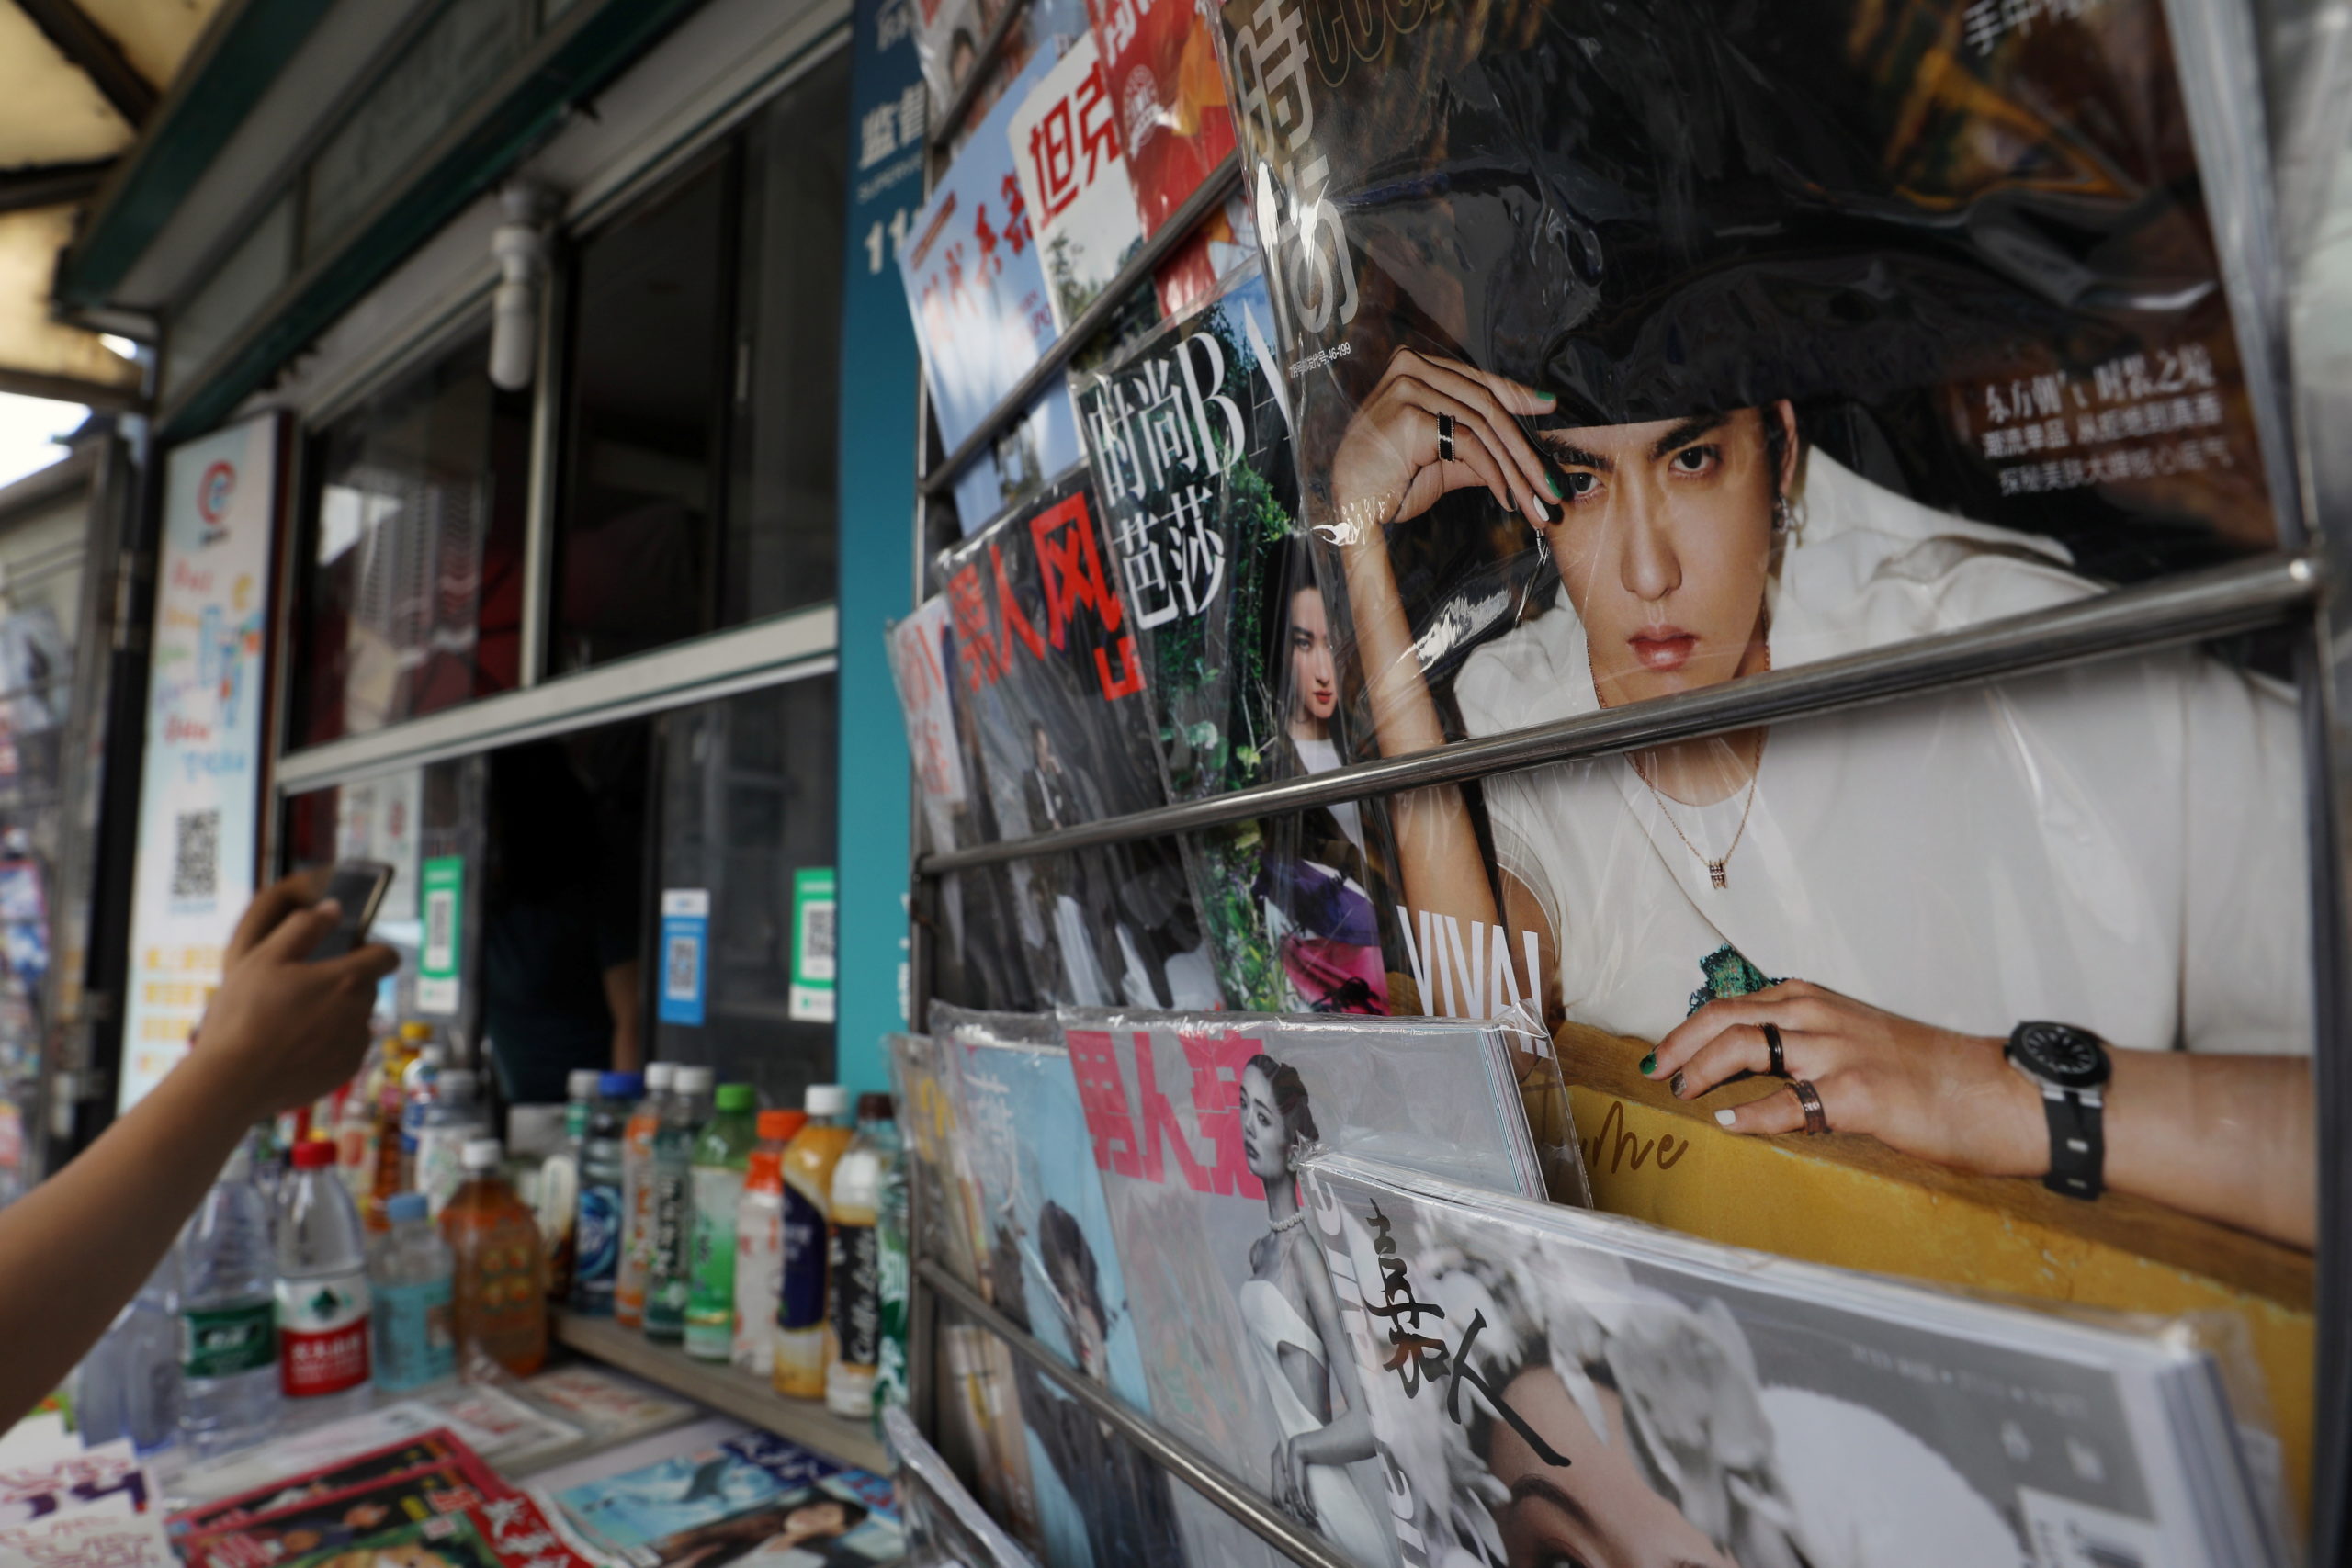 Singer-actor Kris Wu is seen on the cover of a fashion magazine at a newsstand in Beijing, China July 20, 2021. 